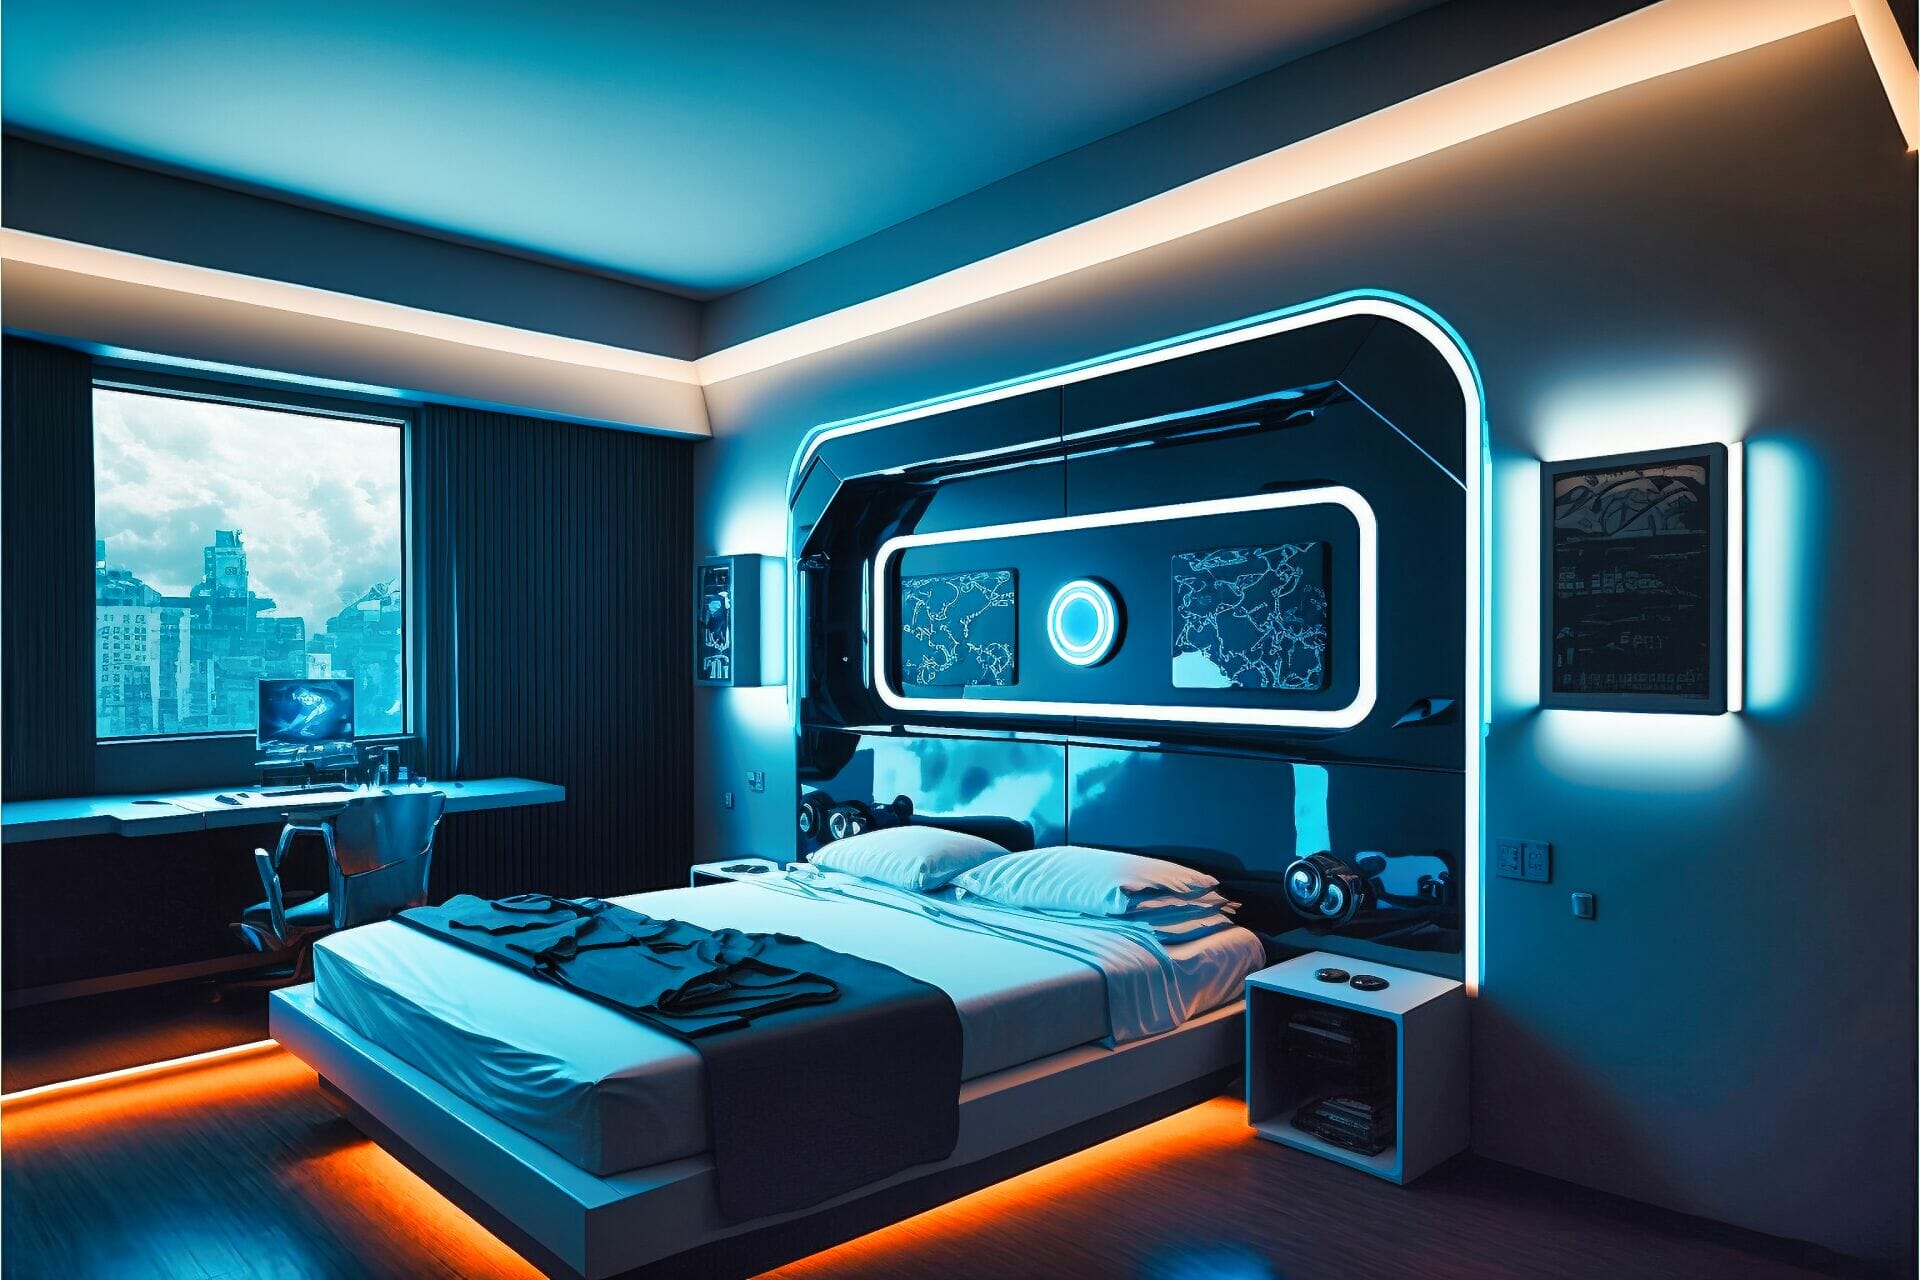 Bedroom With A Space-Age, Cyberpunk Feel. The Walls Are Painted A Deep Blue, With Silver Accents. The Center Of The Room Features A Large, Sleek Black Bed, With A Matching Bed Frame And Nightstands. The Lighting Is Low And Ambient, With A Light Strip Running Along The Walls, And A Space-Age-Style Chandelier With Multiple Led Bulbs Providing Ambient Lighting. The Floor Is An Industrial Black Tile With A Glossy Finish. Several Space-Age-Style Accessories, Such As A Robotic Arm Lamp, A Gaming Console, And A Mirror With A Digital Display, Create A Futuristic Atmosphere. The Walls Are Adorned With Space-Age Artwork, And The Overall Effect Is One Of Modern, High-Tech Luxury.